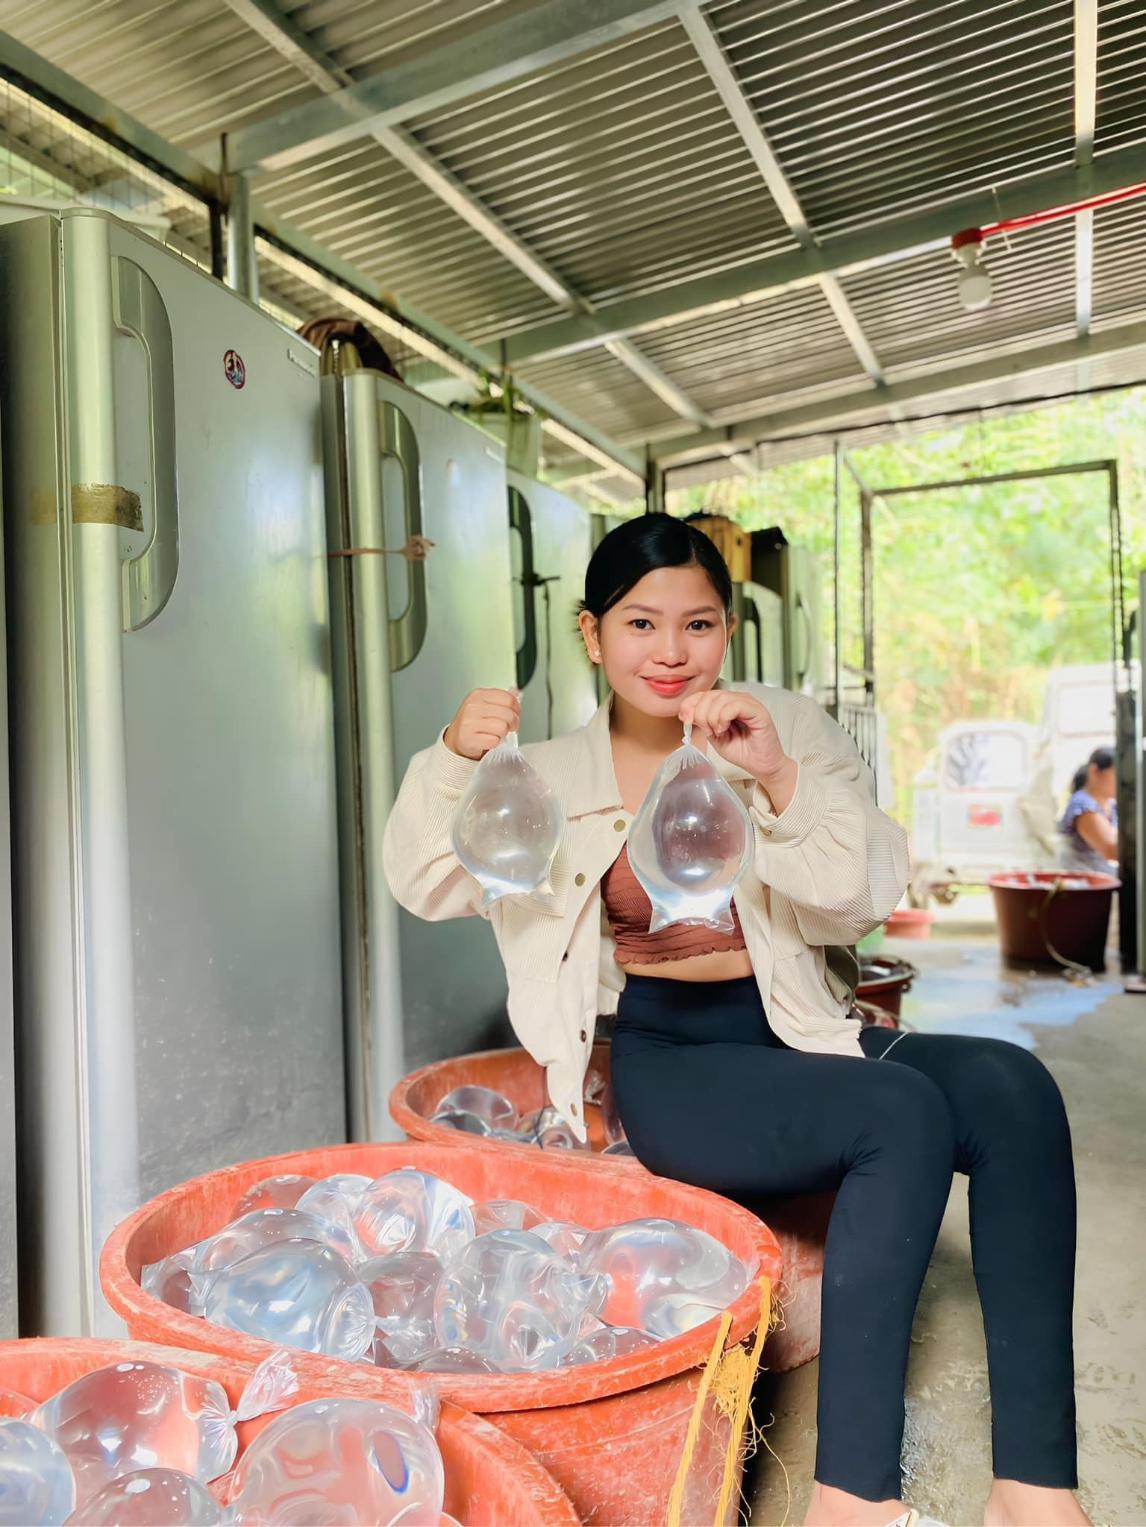 Viral Ice Seller ‘Miss Yelo’ Earns Php90k a Month